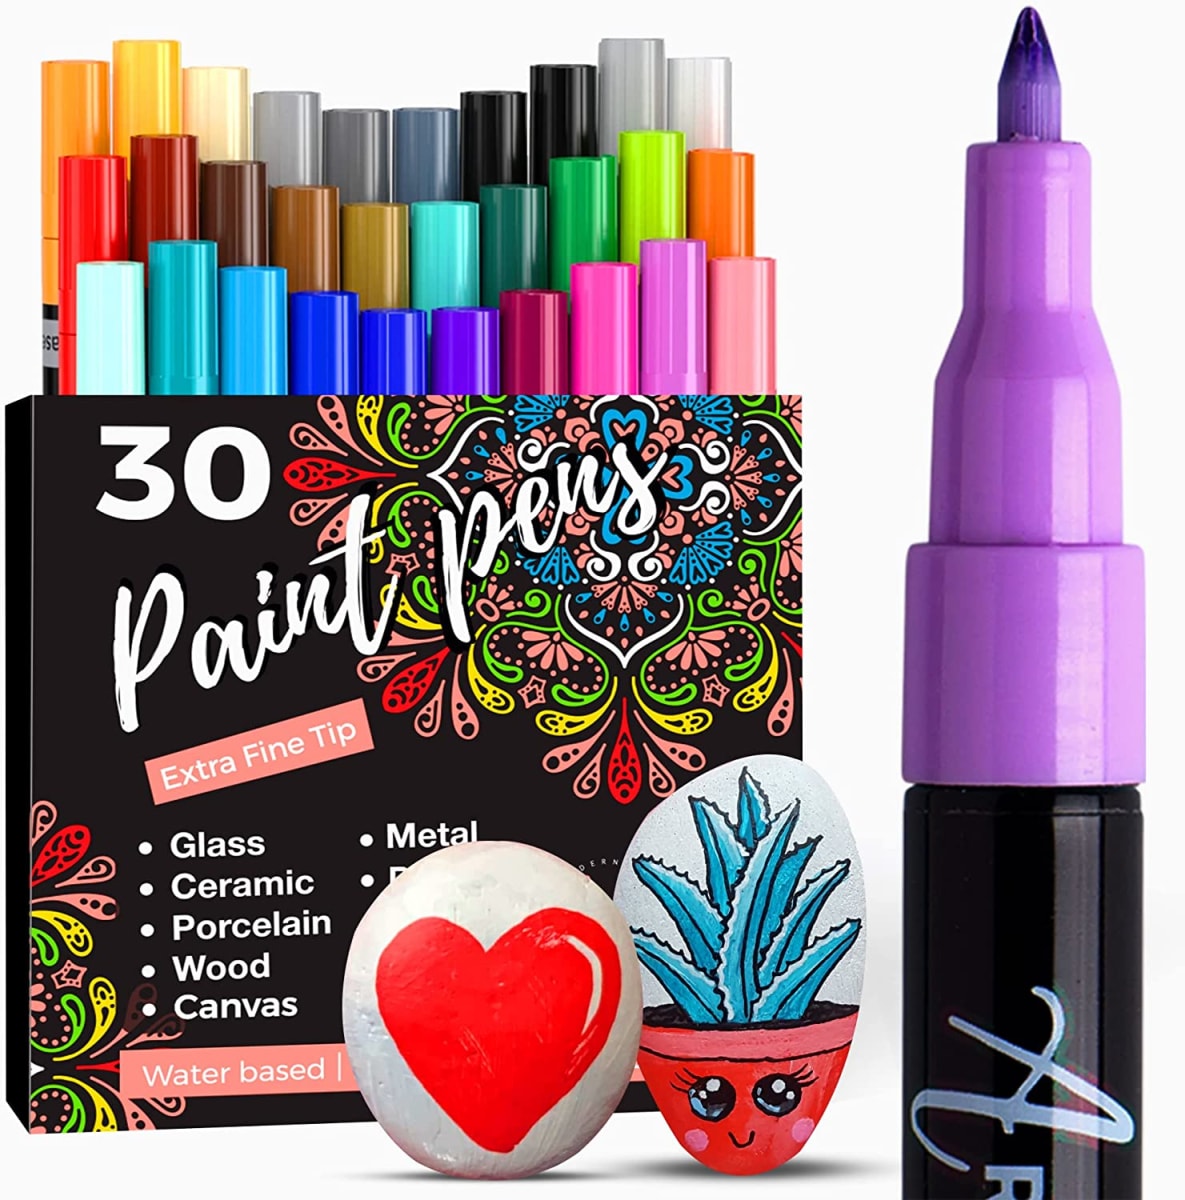 Artistro Acrylic Paint Pens with Extra Fine Tip